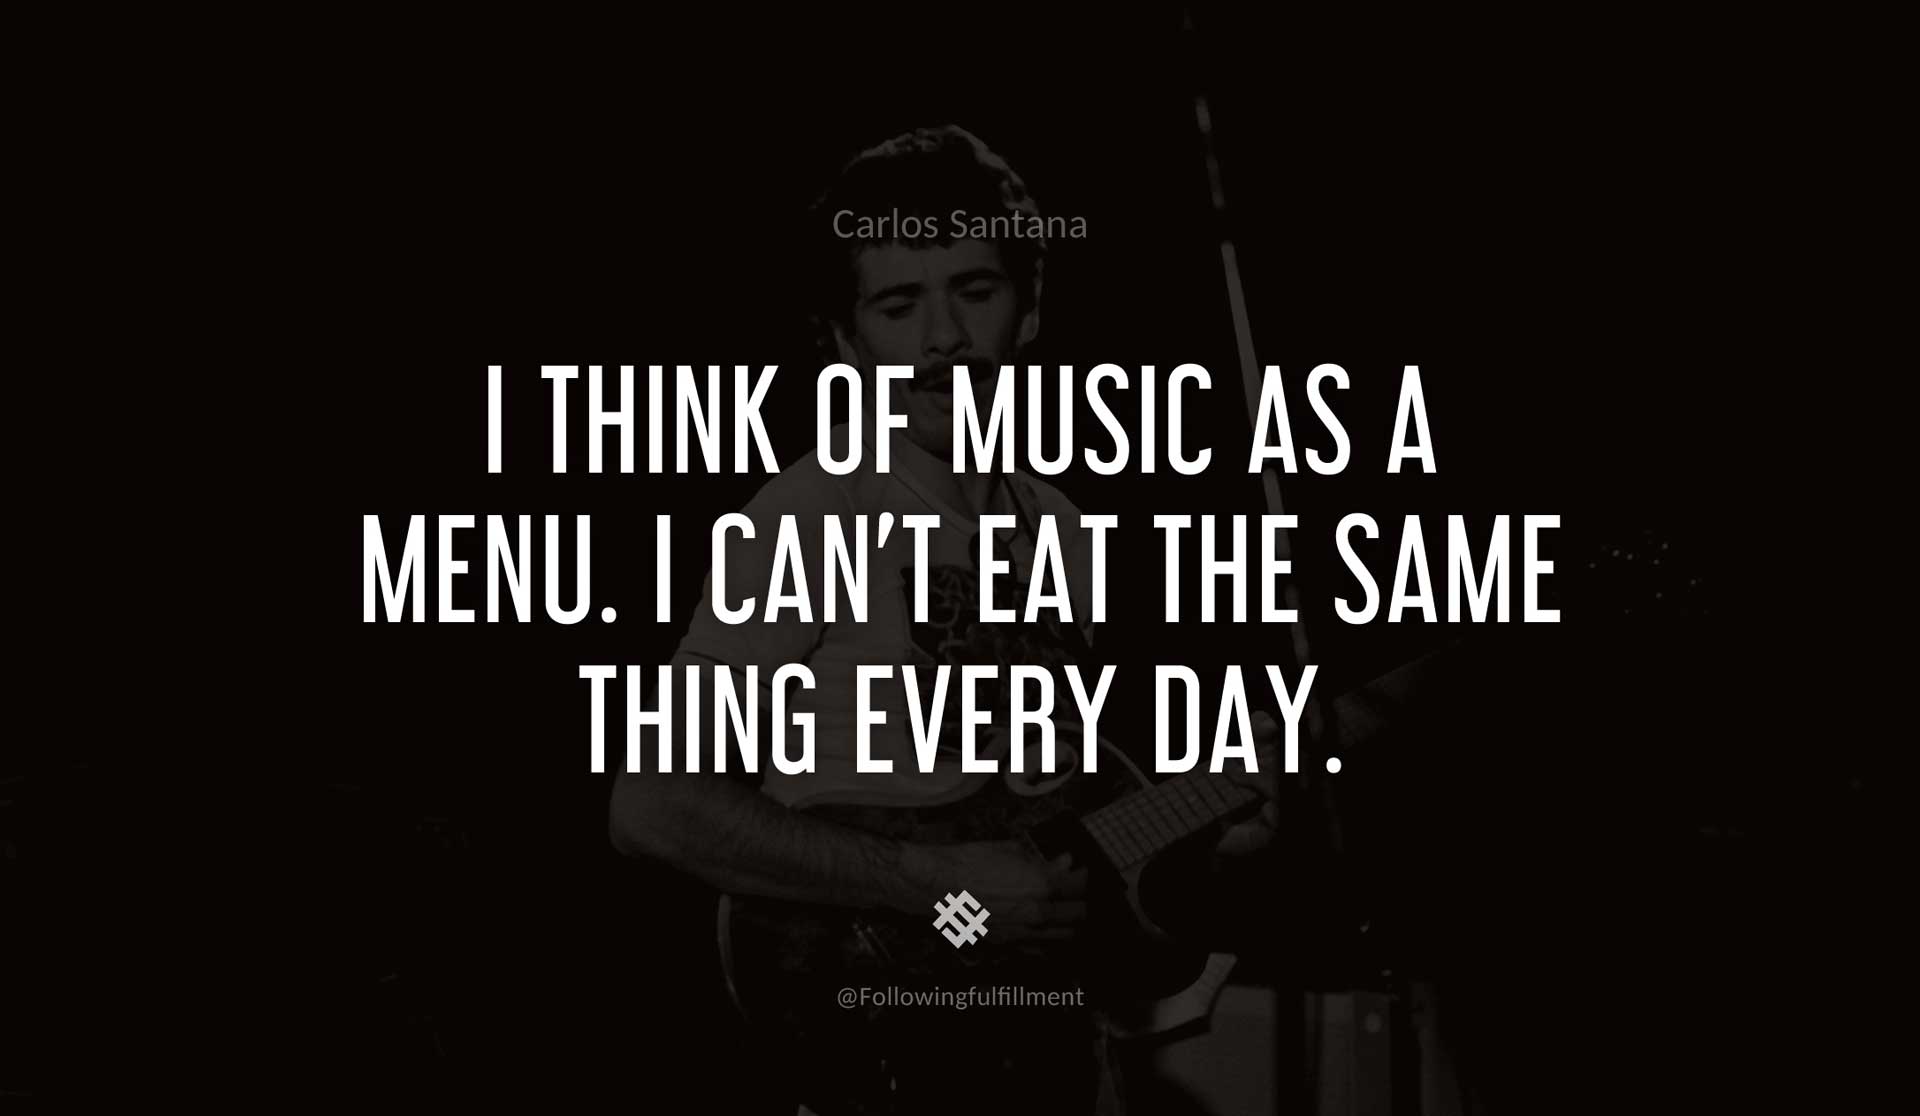 I-think-of-music-as-a-menu.-I-can't-eat-the-same-thing-every-day.-CARLOS-SANTANA-Quote.jpg